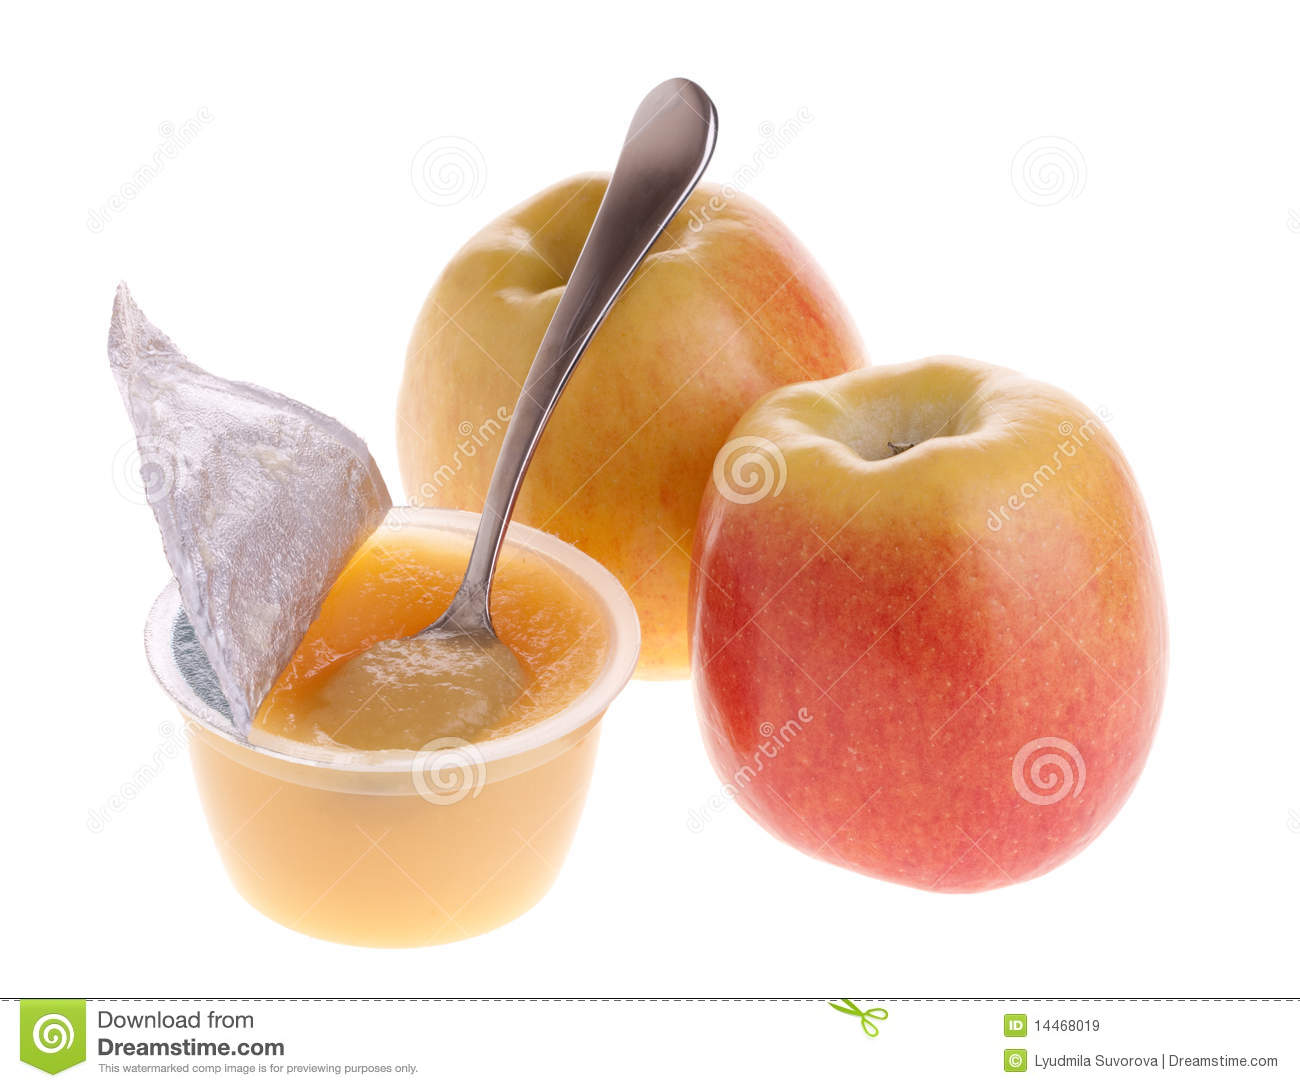 Apple Sauce And Apples Royalty Free Stock Images   Image  14468019